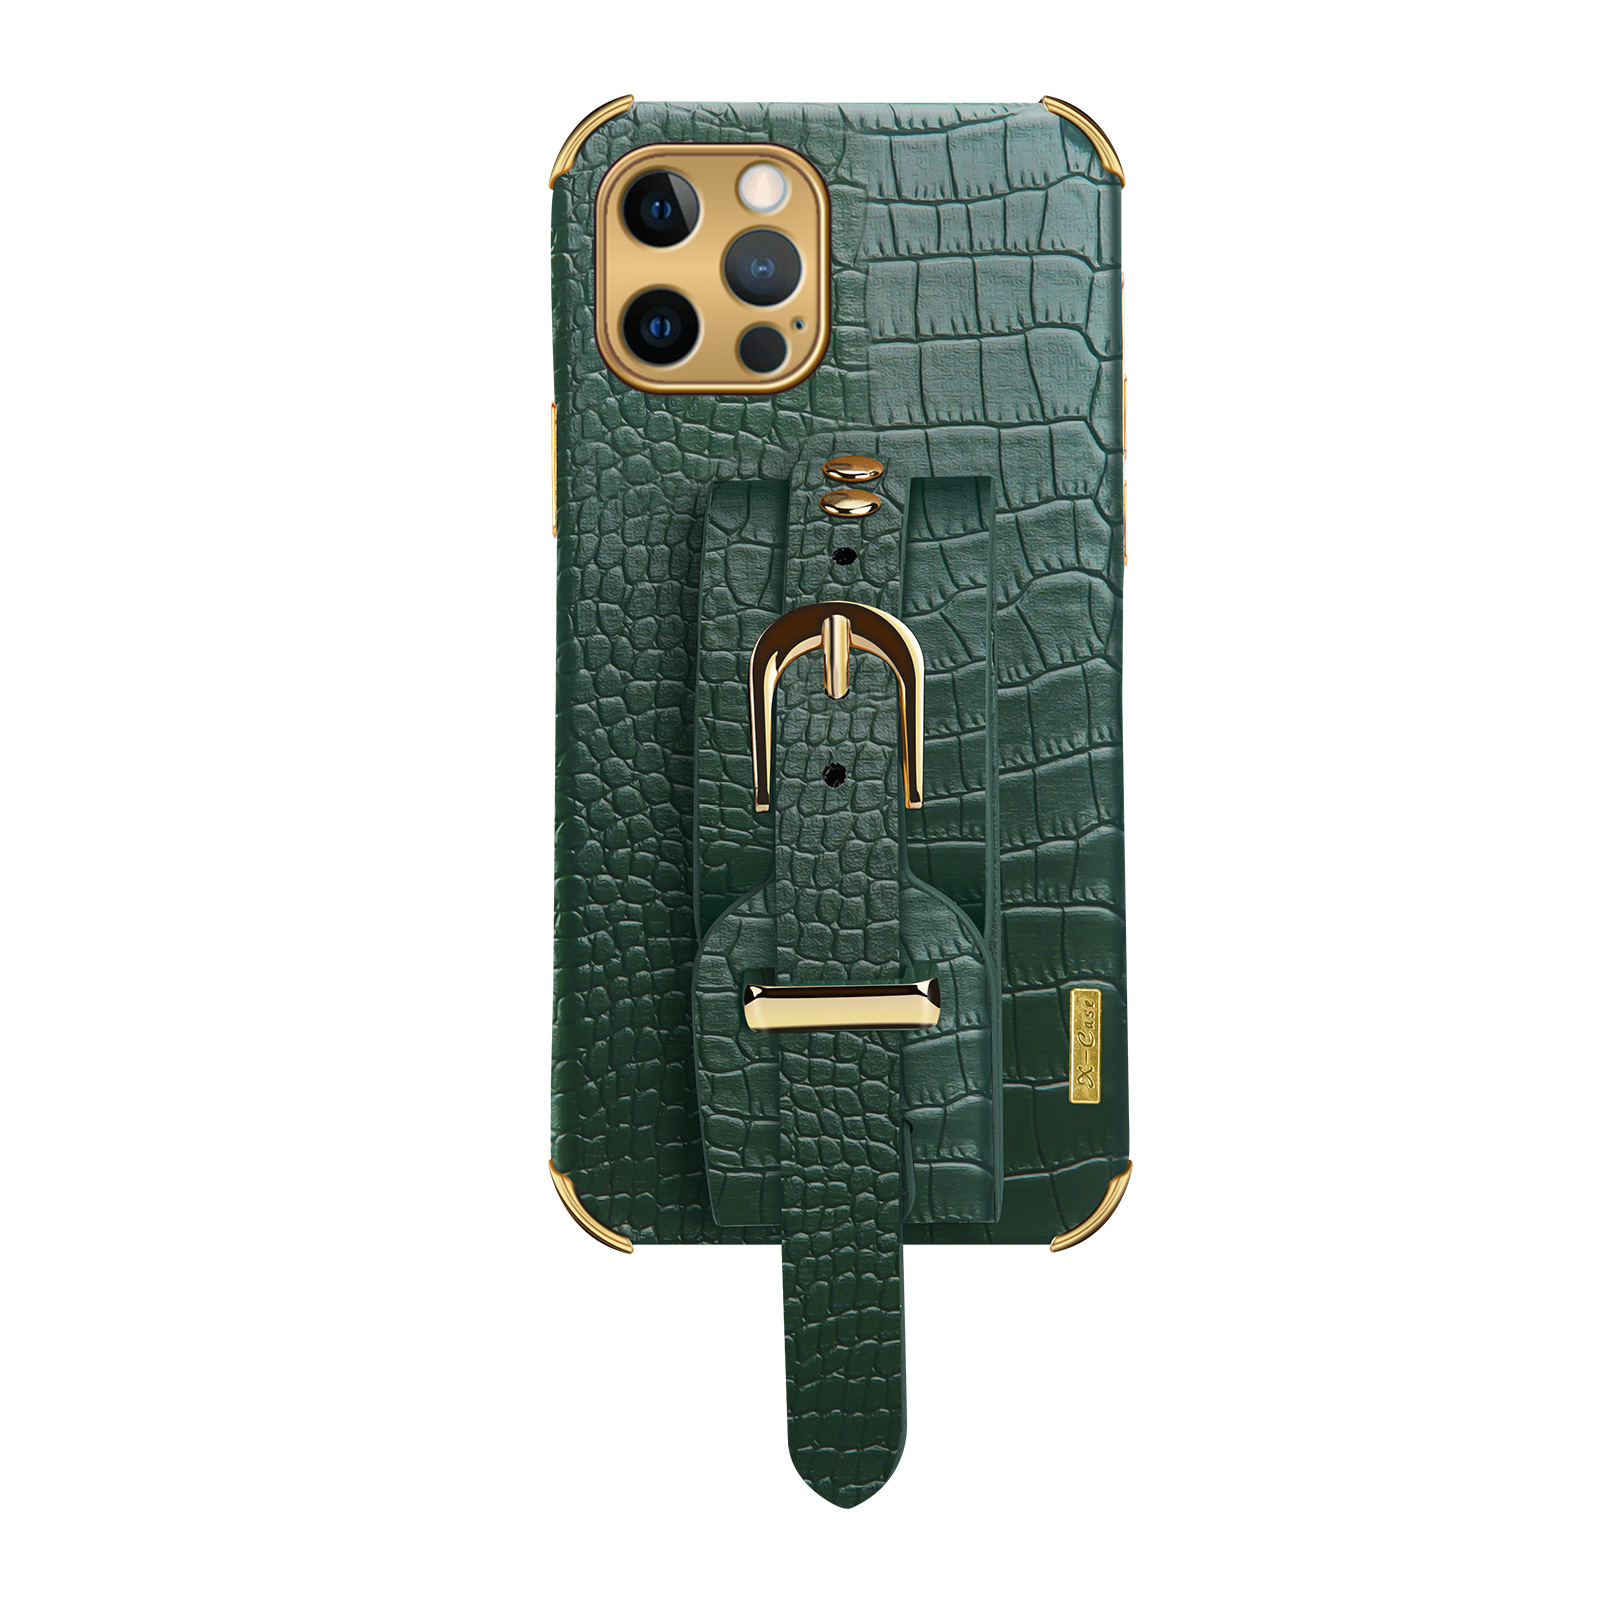 Samsung Galaxy A22 5G Back Cover Hoesje met Handvat - PU Leer - Backcover - Samsung Galaxy A22 5G - Groen